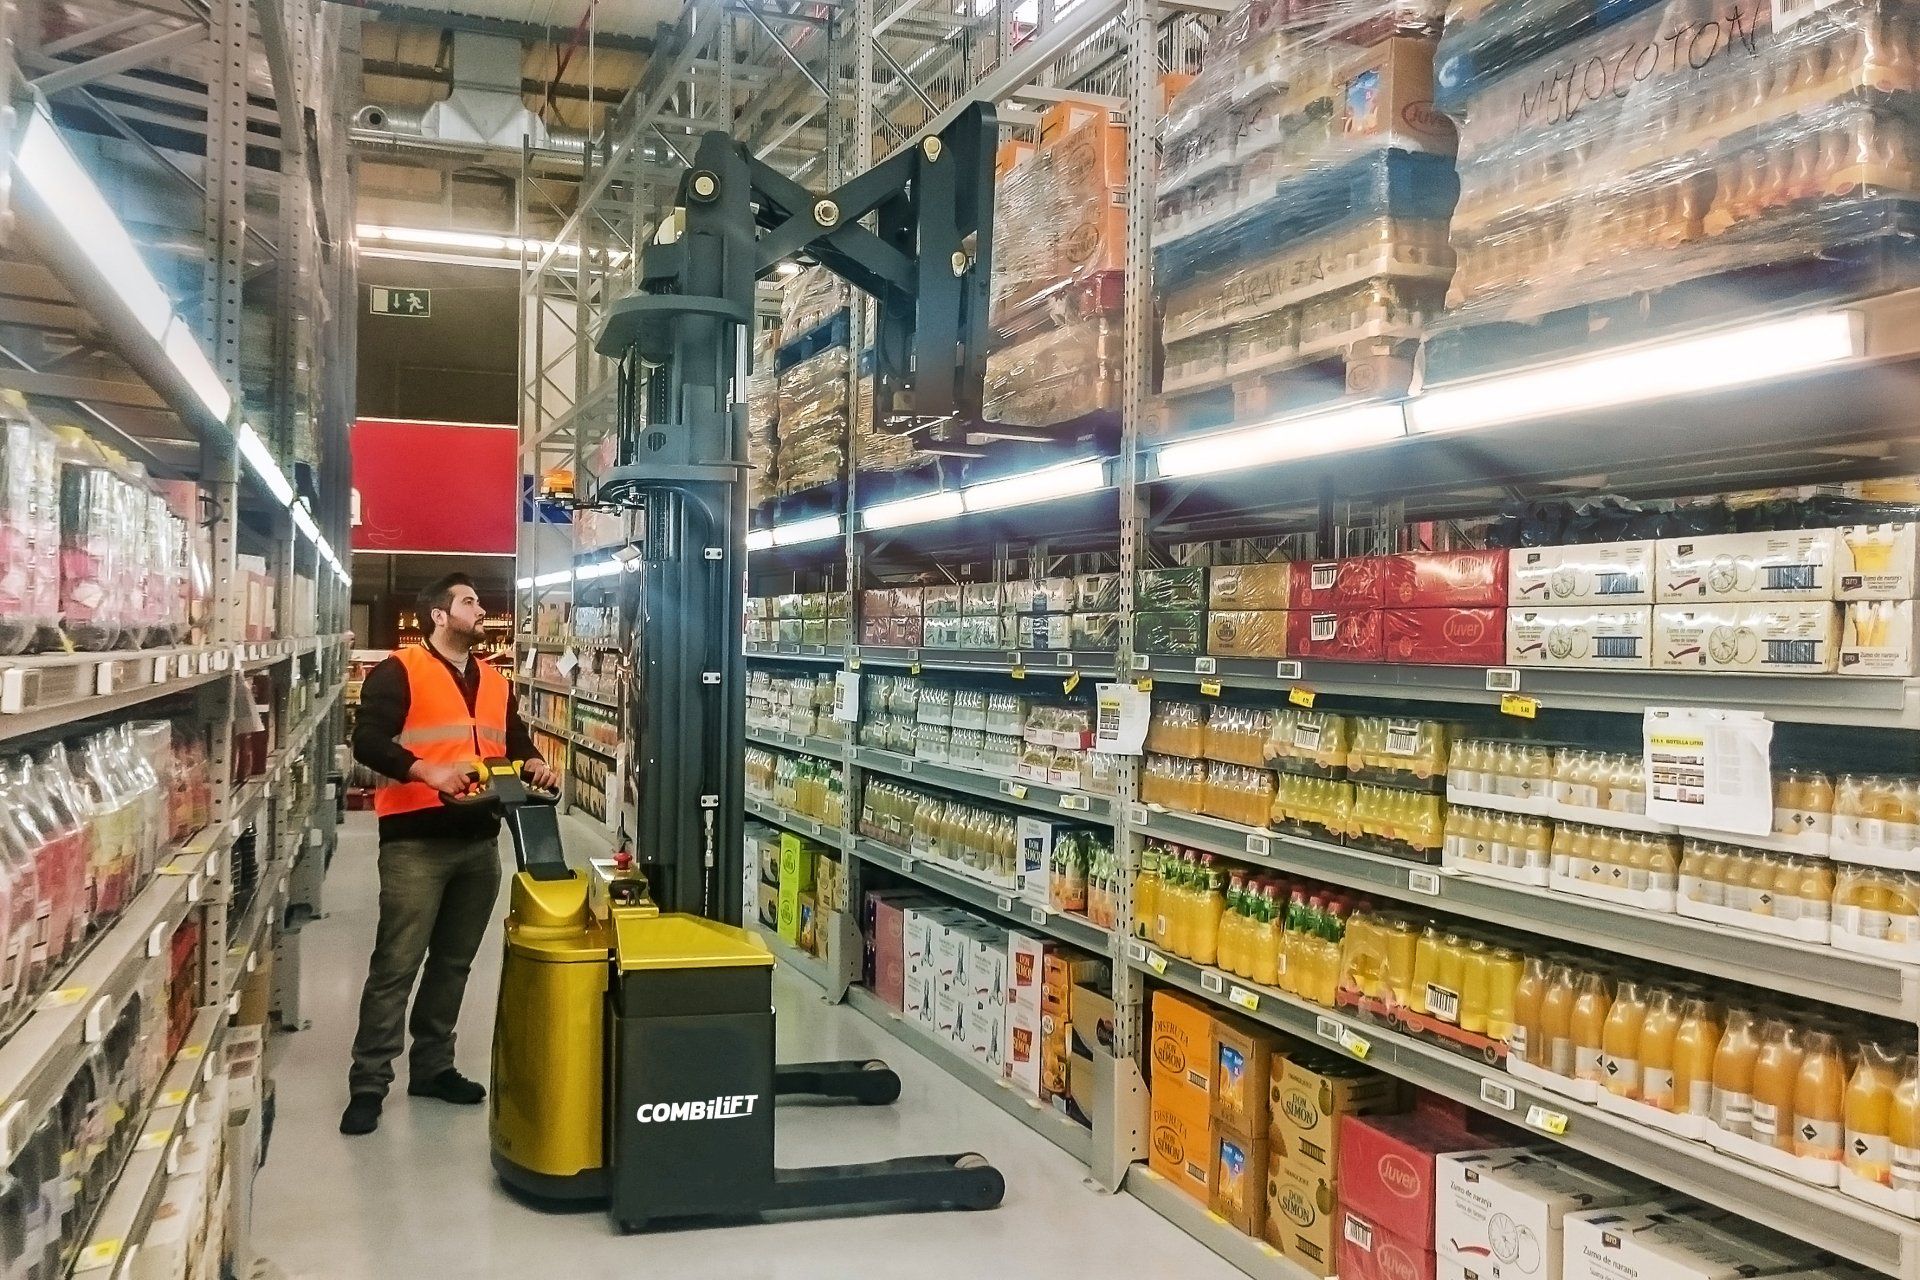 Man operating a Combilift stacker forklift in the food and drink aisle of a warehouse